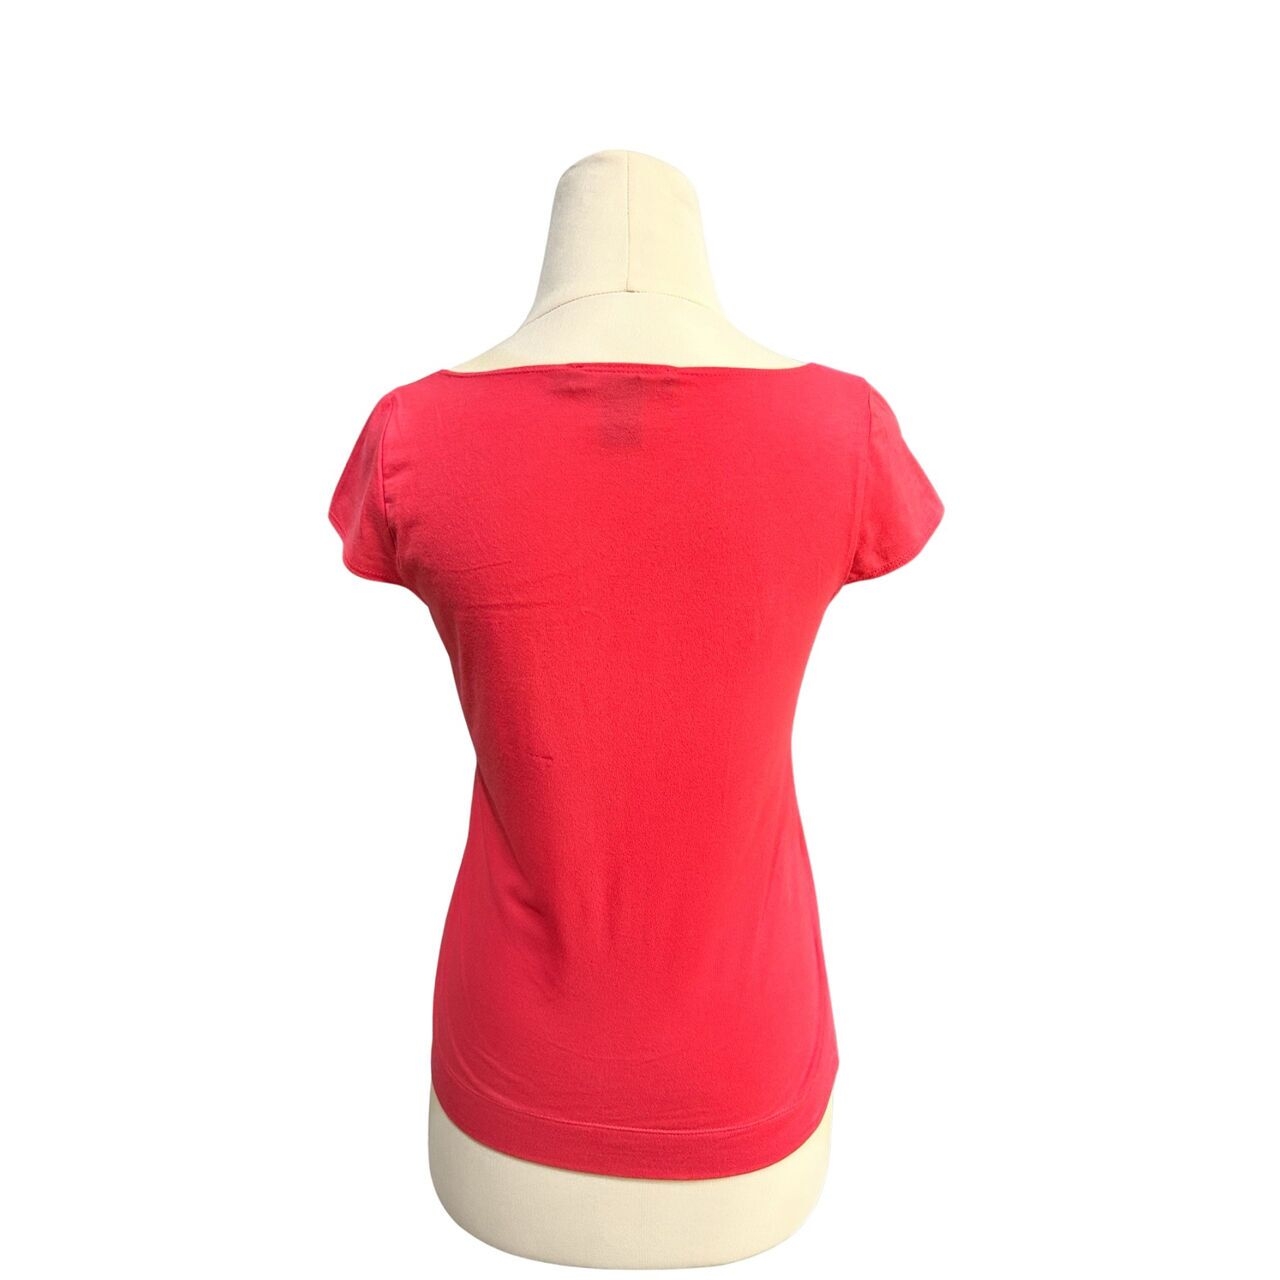 DKNY Red Top